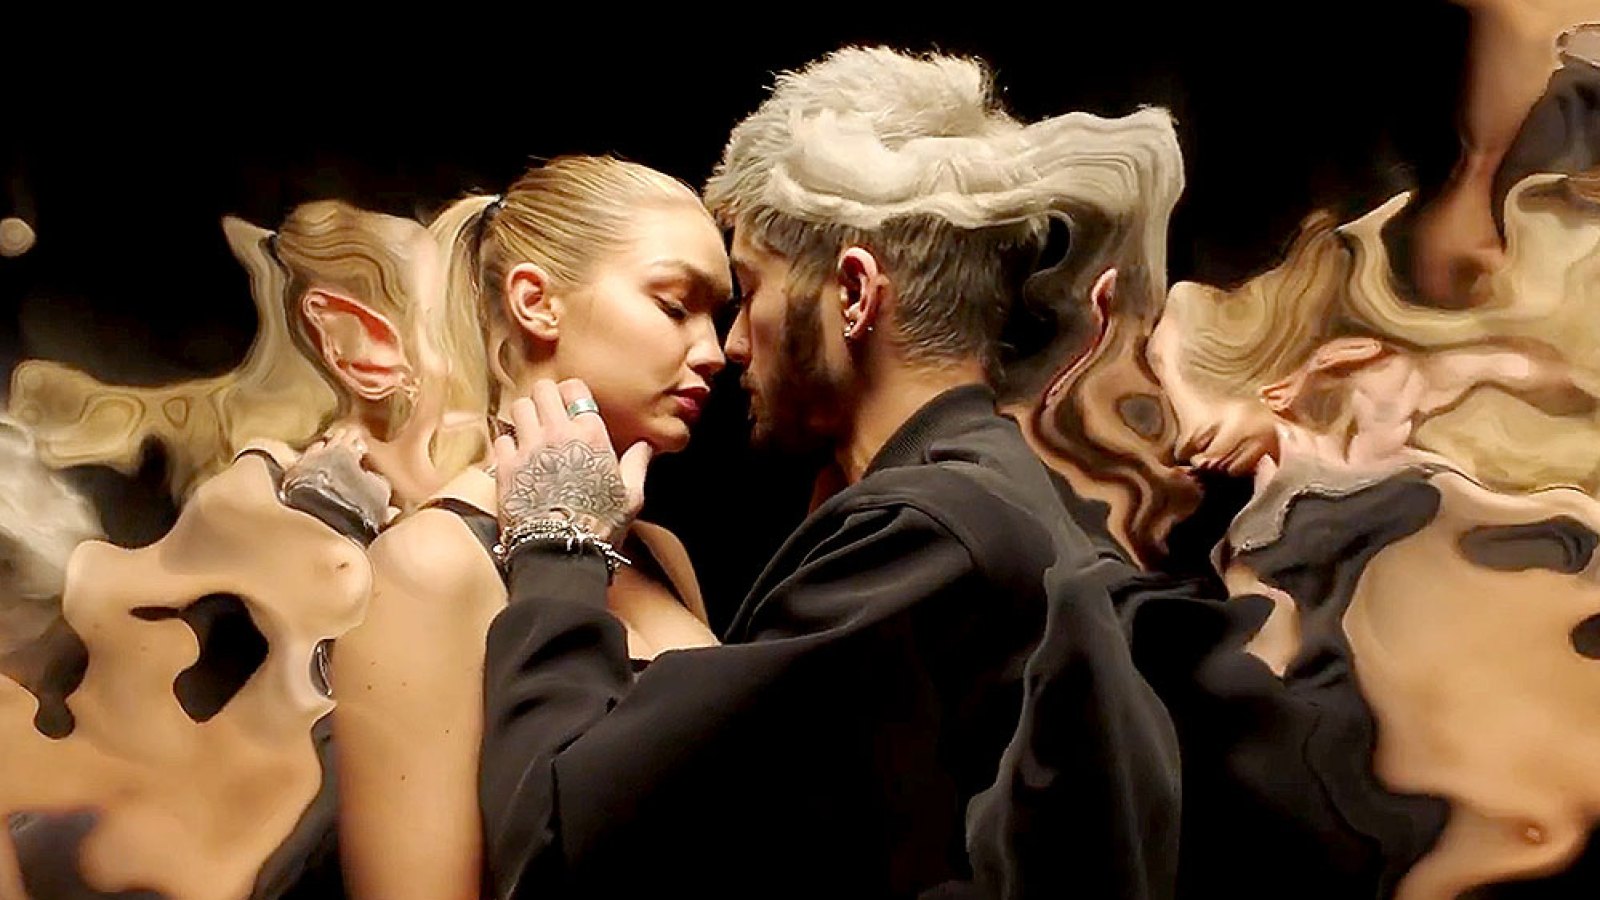 Gigi Hadid and Zayn Malik make out in the new video for 'Pillowtalk.'